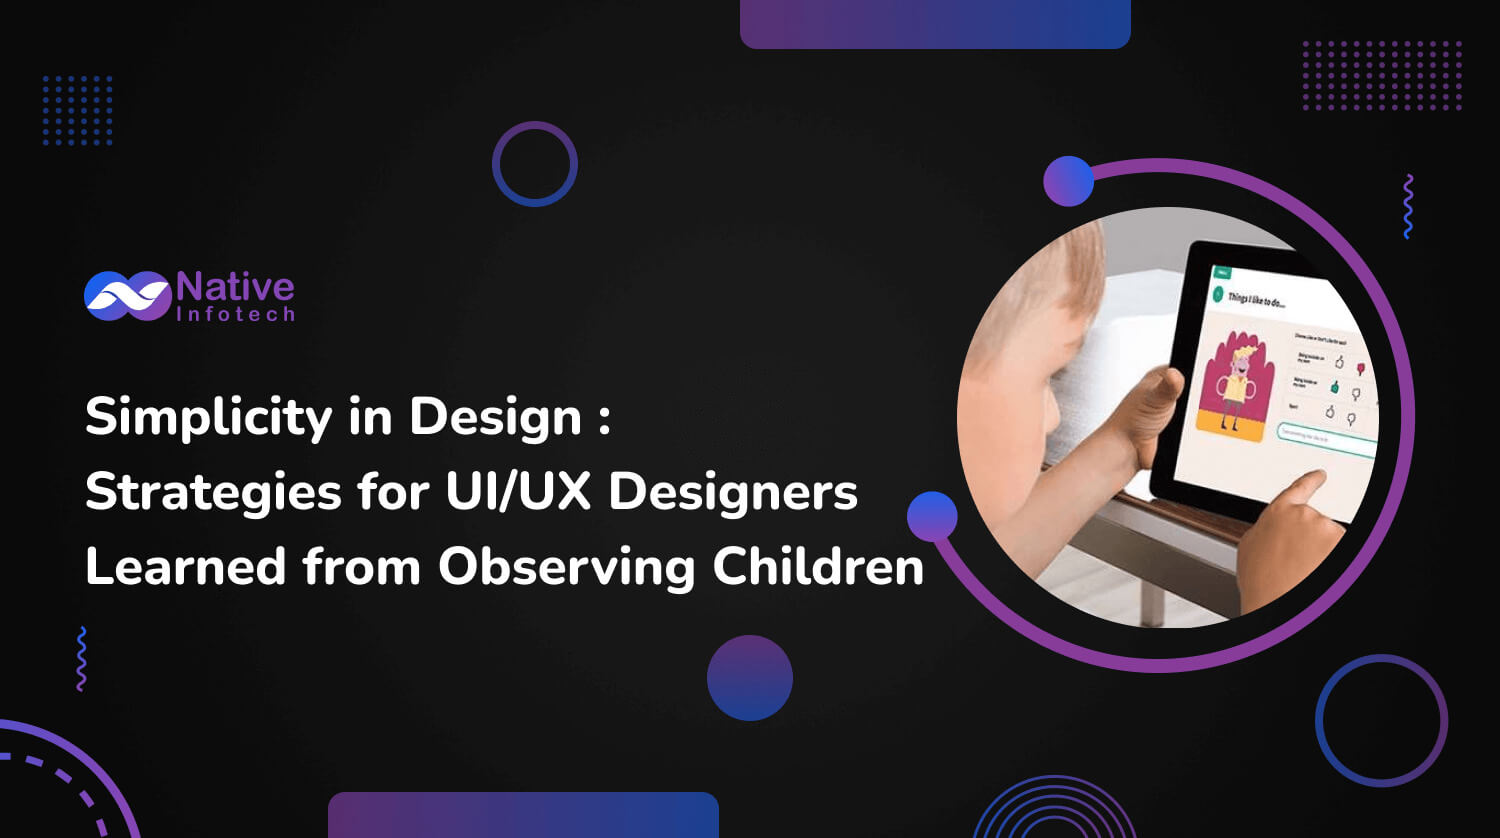 Simplicity in Design : Strategies for UI/UX Designers Learned from Observing Children | Native Infotech